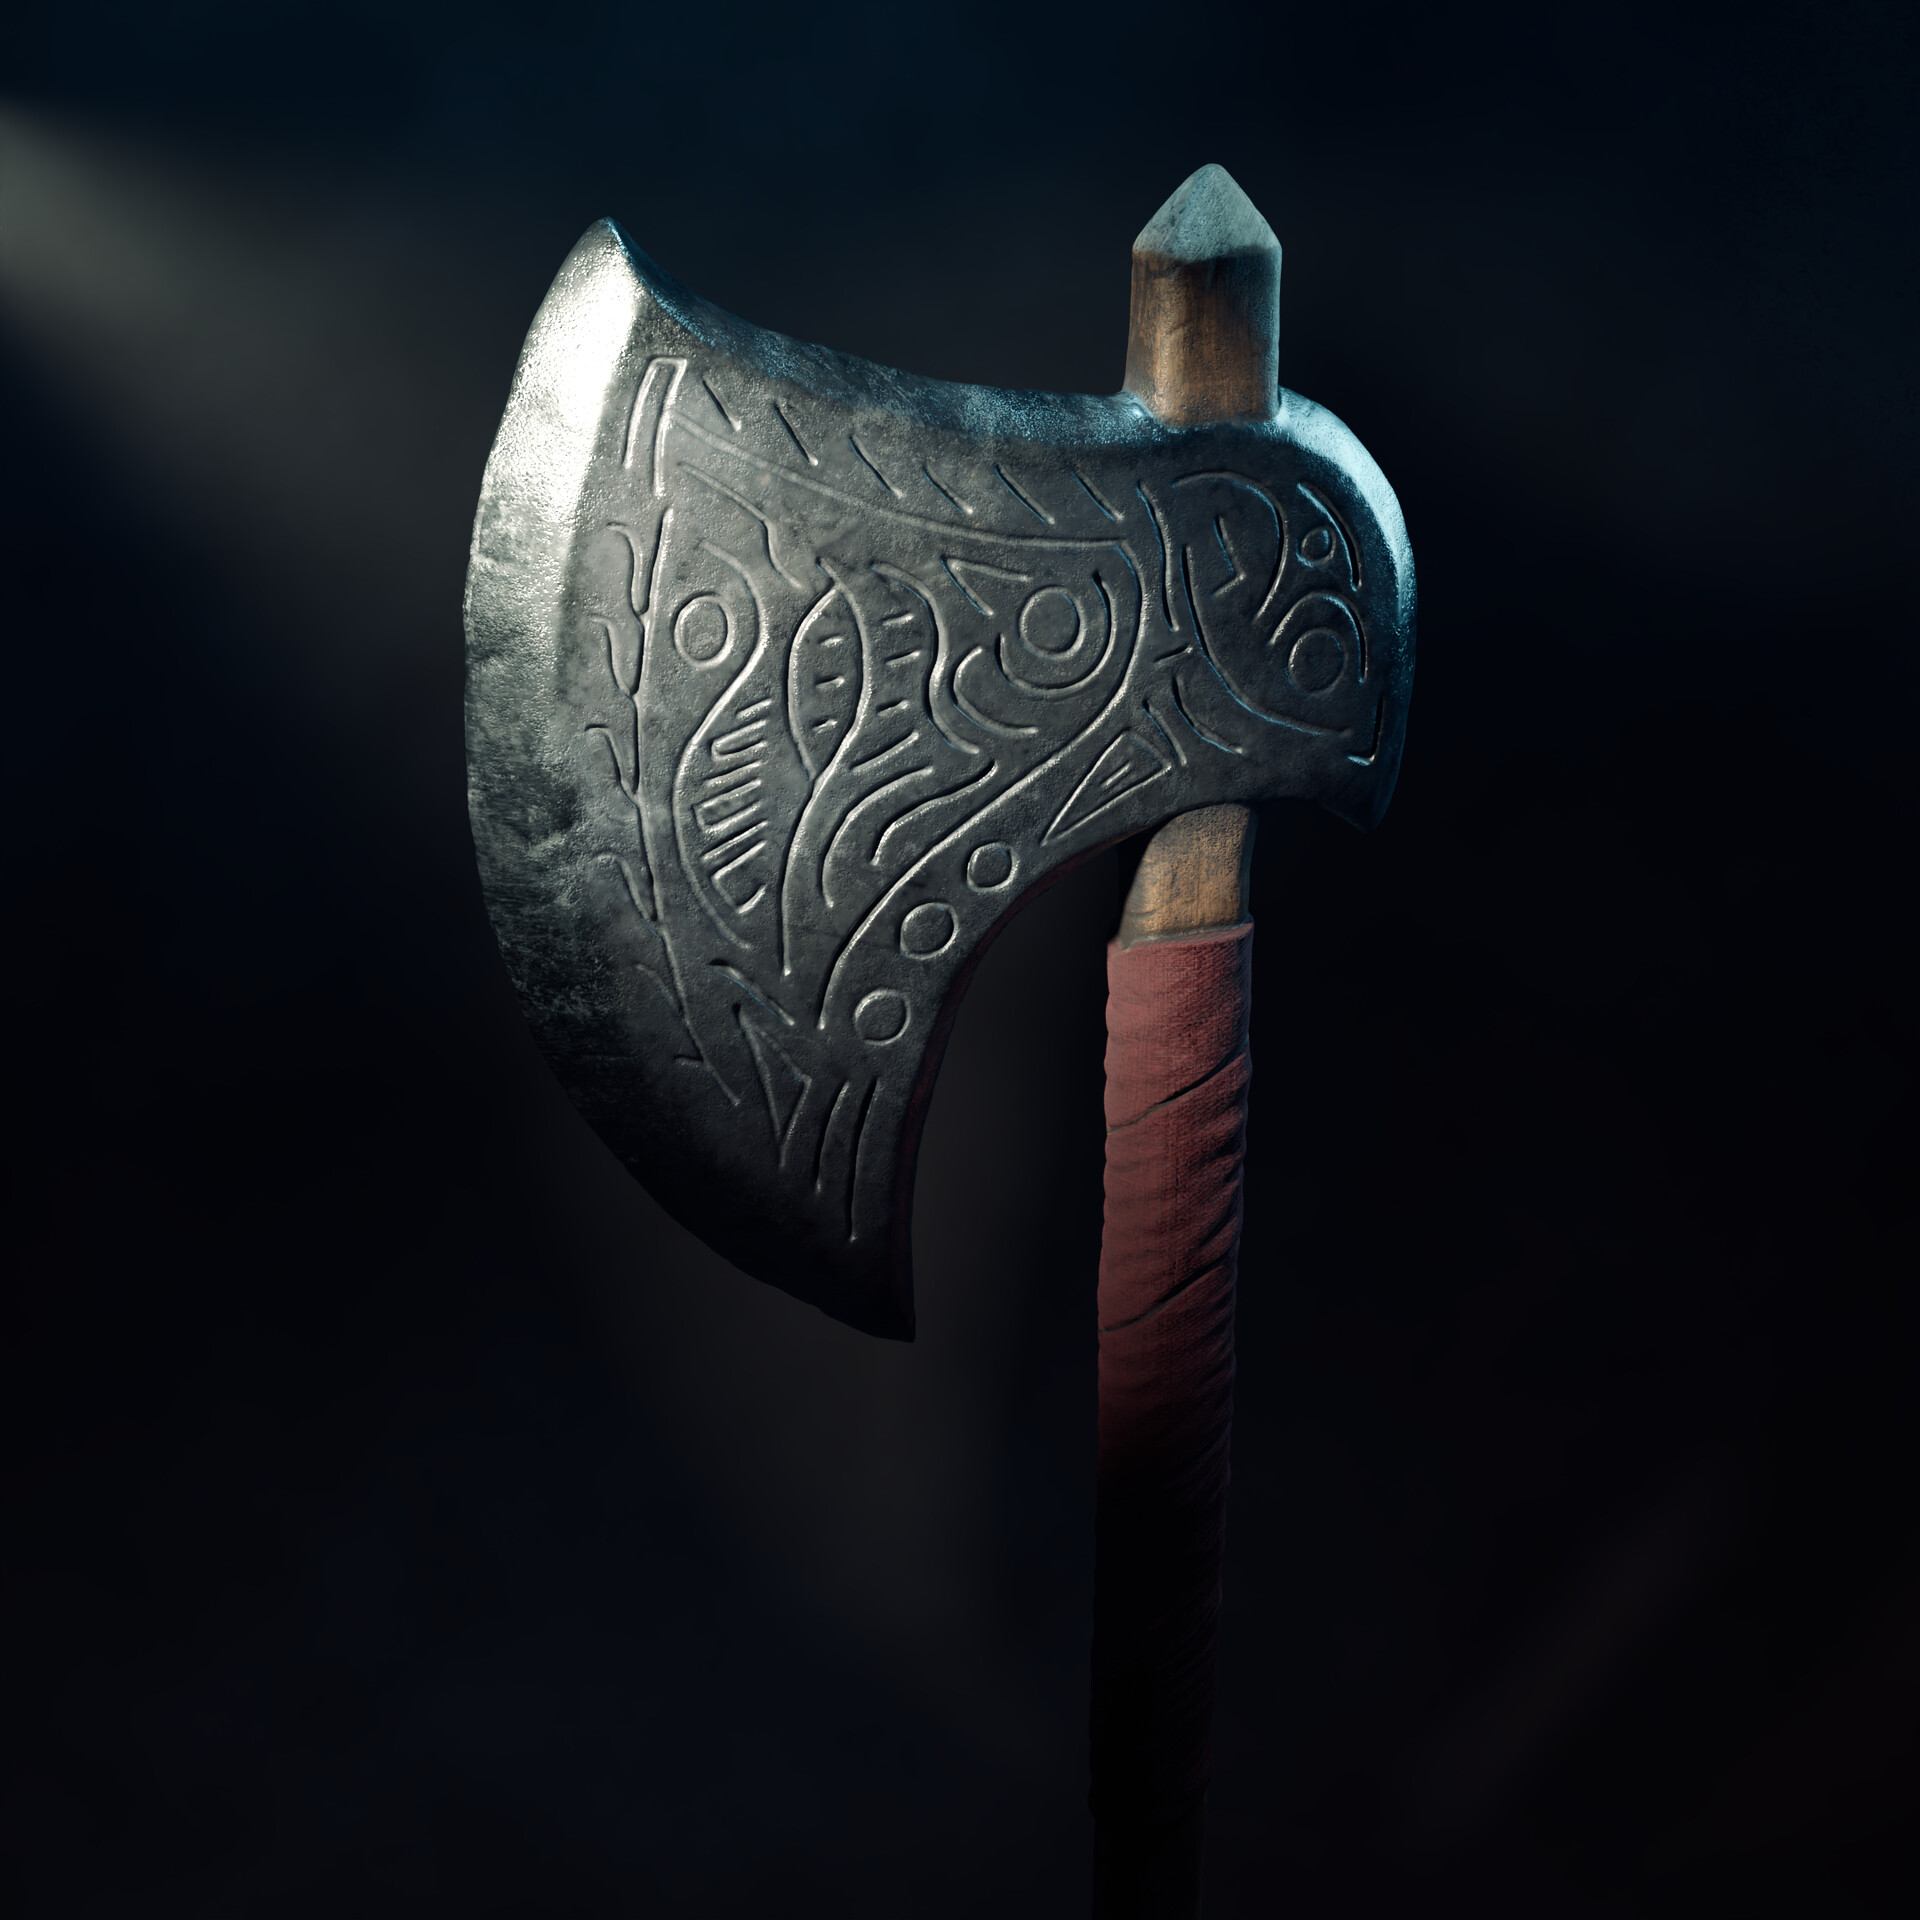 ArtStation - Ancient ax with a medieval and fantastic style